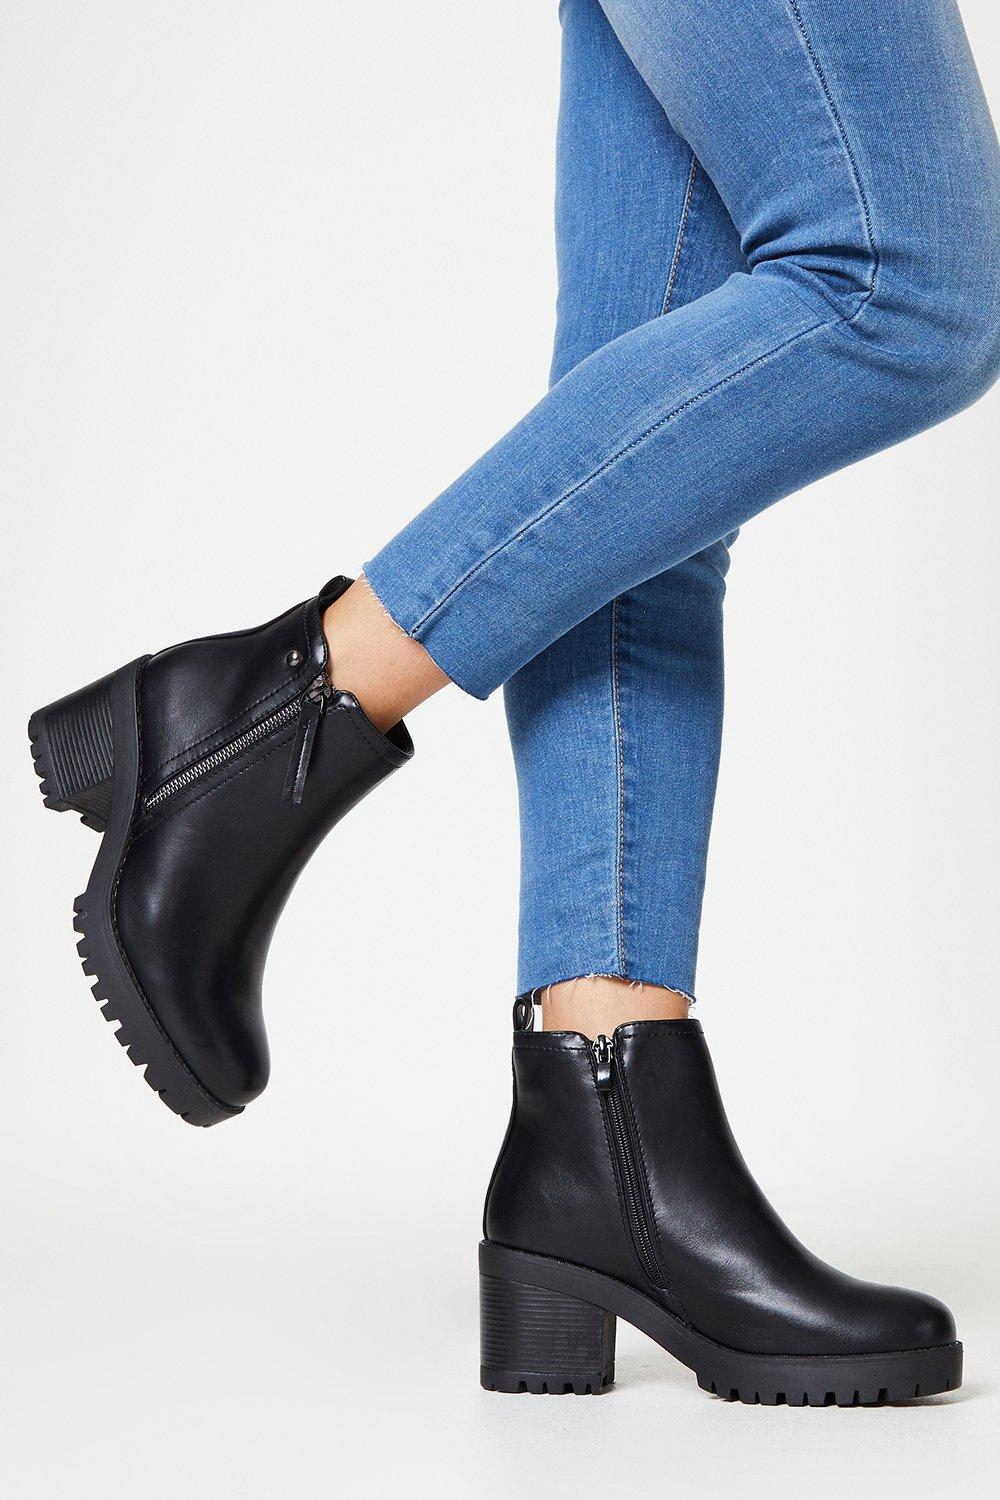 Women’s Faith: Madden Cleated Chunky Side Zip Block Heel Ankle Boots - black - 8